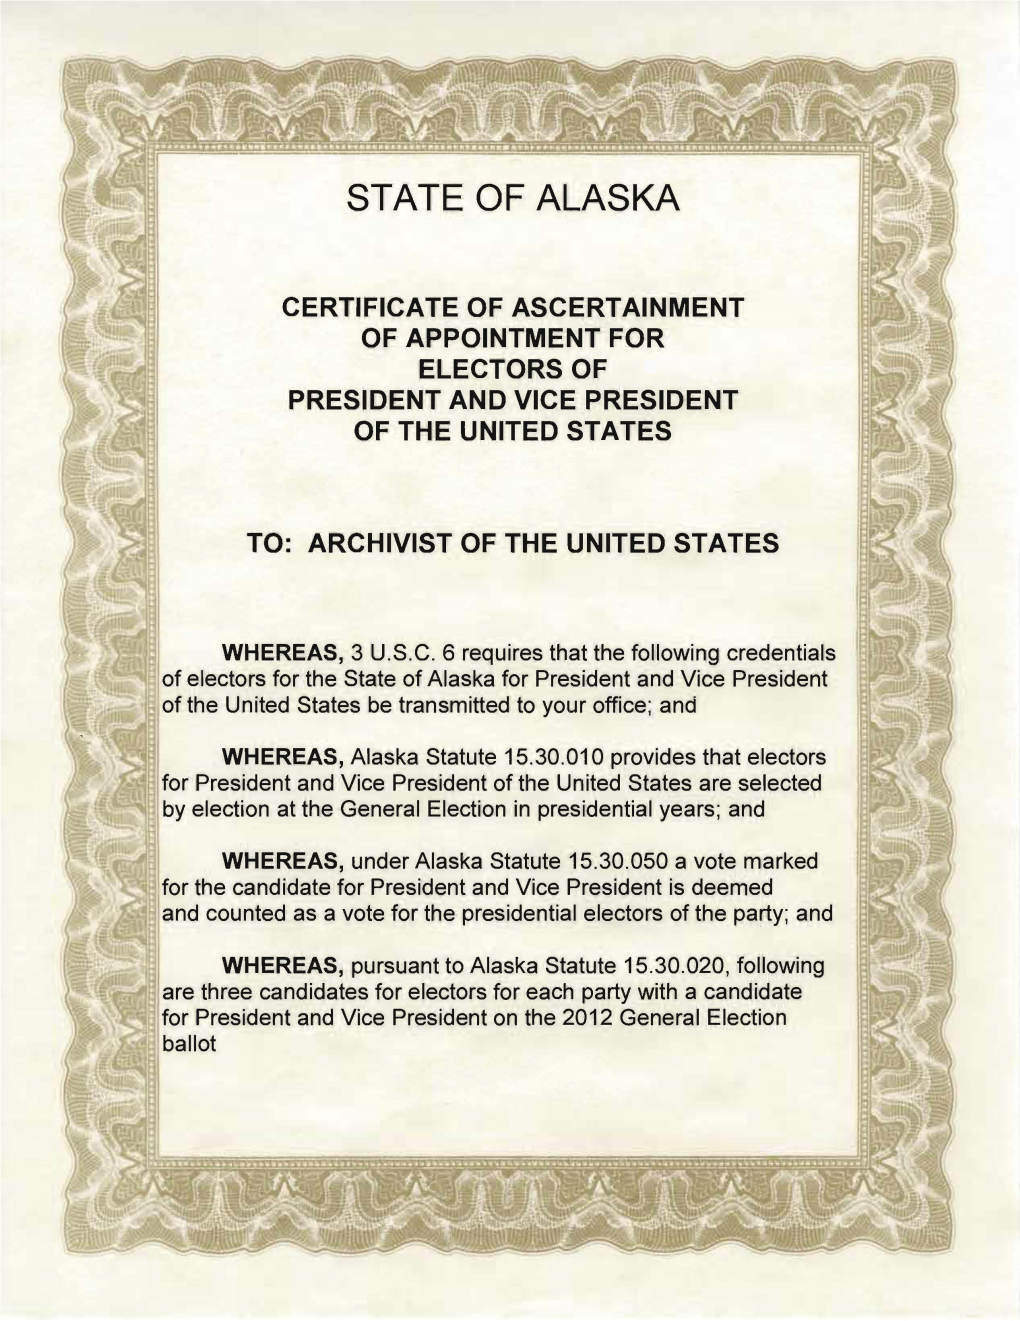 Certificate of Ascertainment of Appointment for Electors of President and Vice Presidenit of the United States